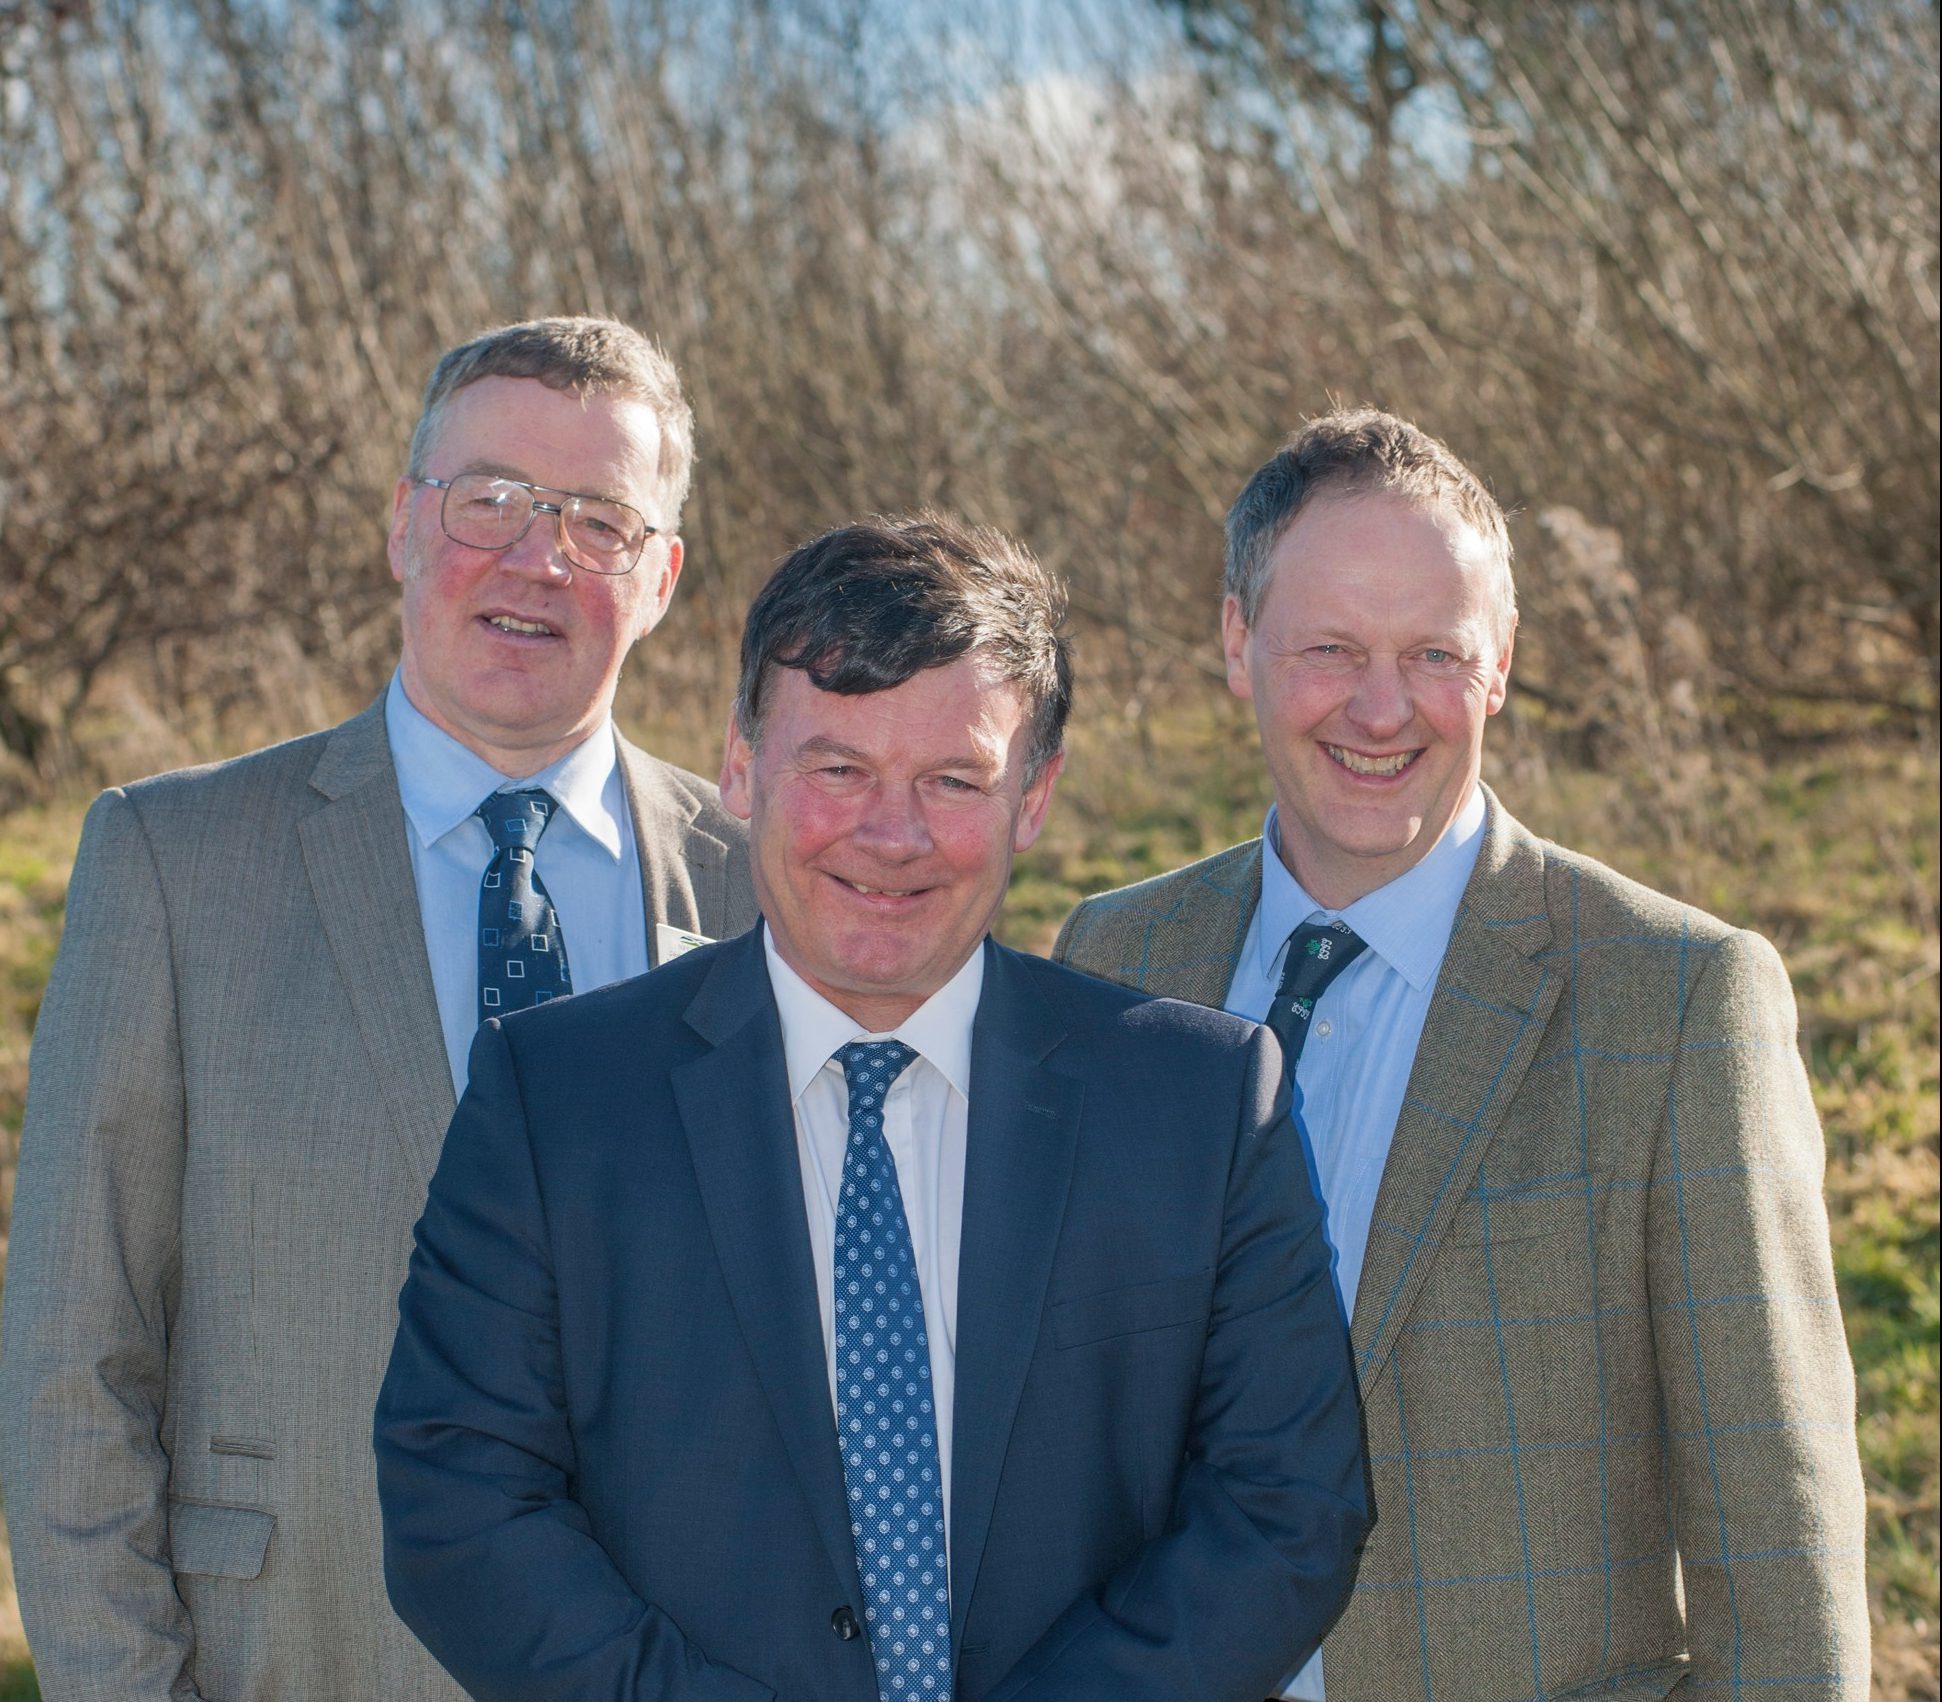 The NFU Scotland leadership election will take place in February